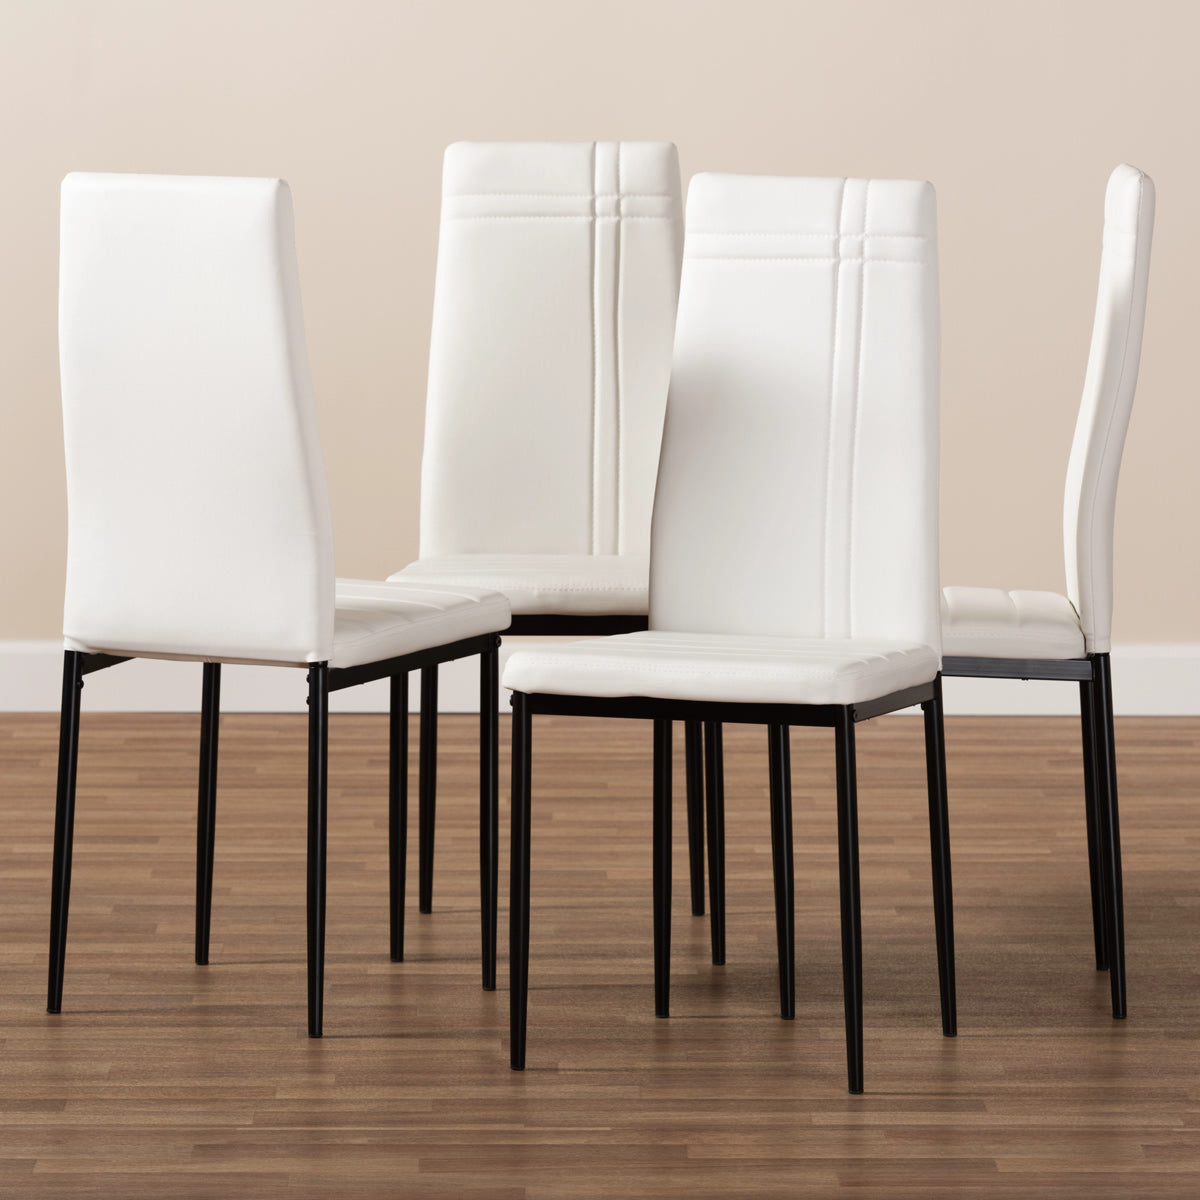 Baxton Studio Matiese Modern and Contemporary White Faux Leather Upholstered Dining Chair (Set of 4) Baxton Studio-dining chair-Minimal And Modern - 5